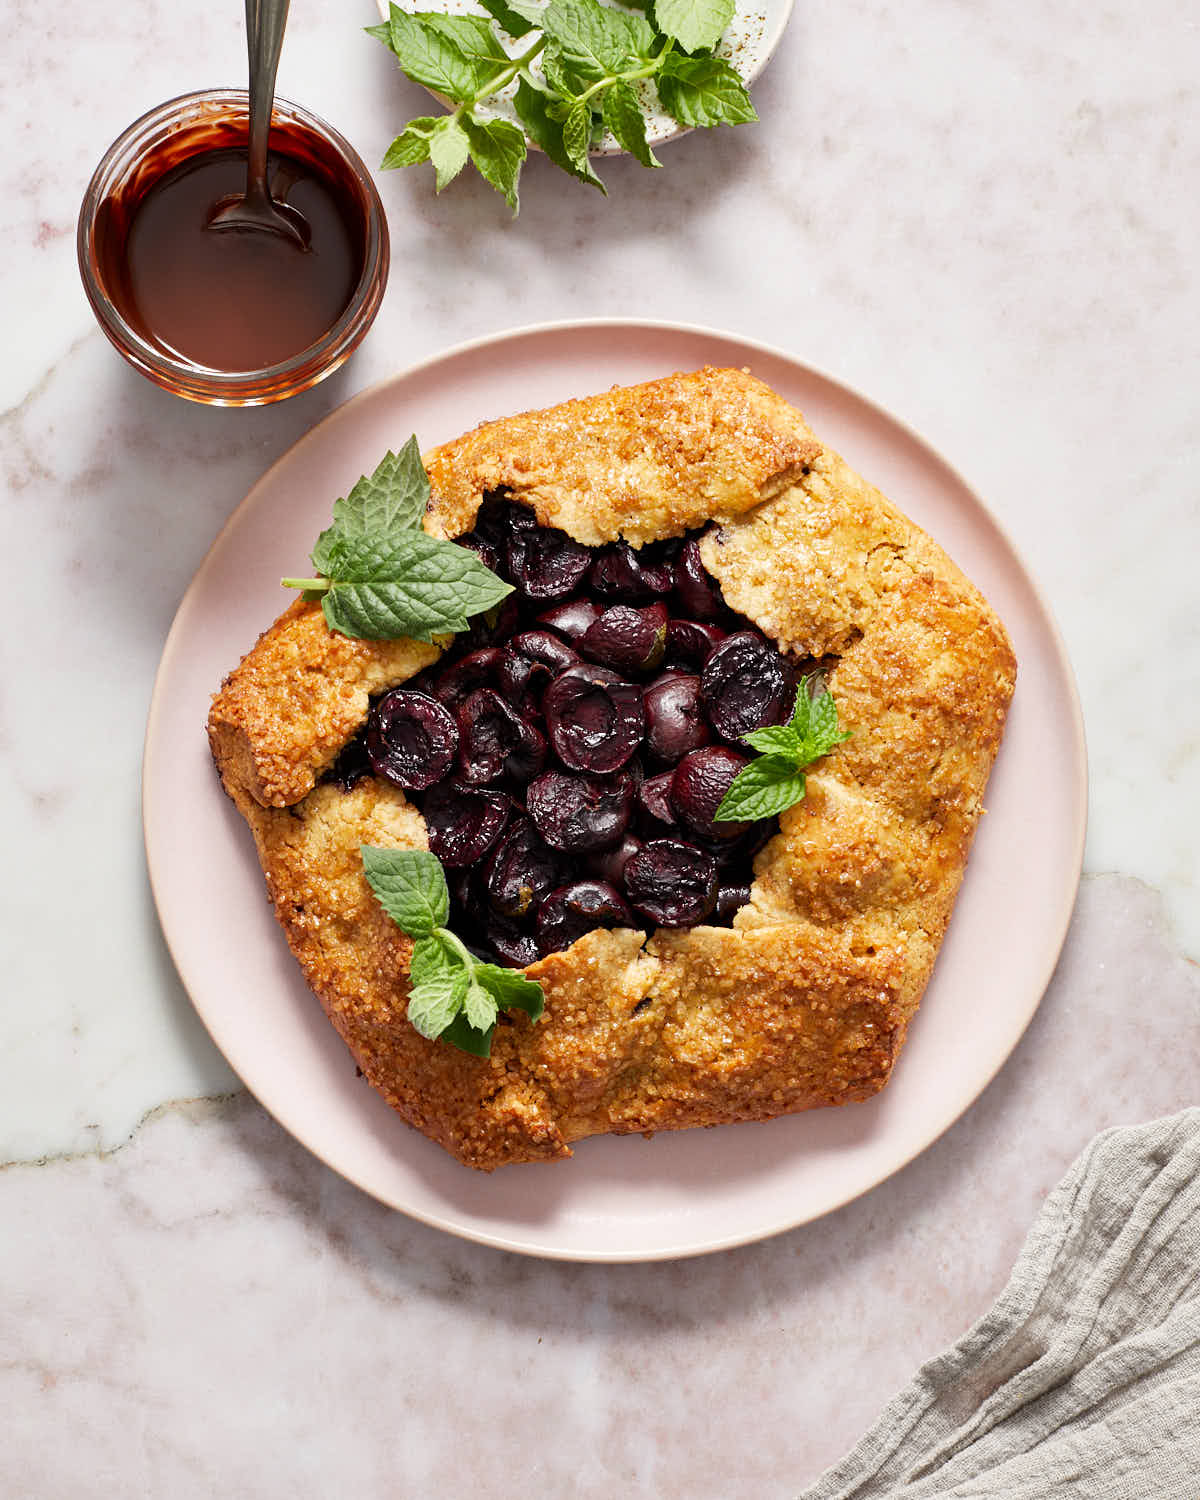 Baked cherry galette on a pink plate with melted chocolate and fresh mint leaves next to it.